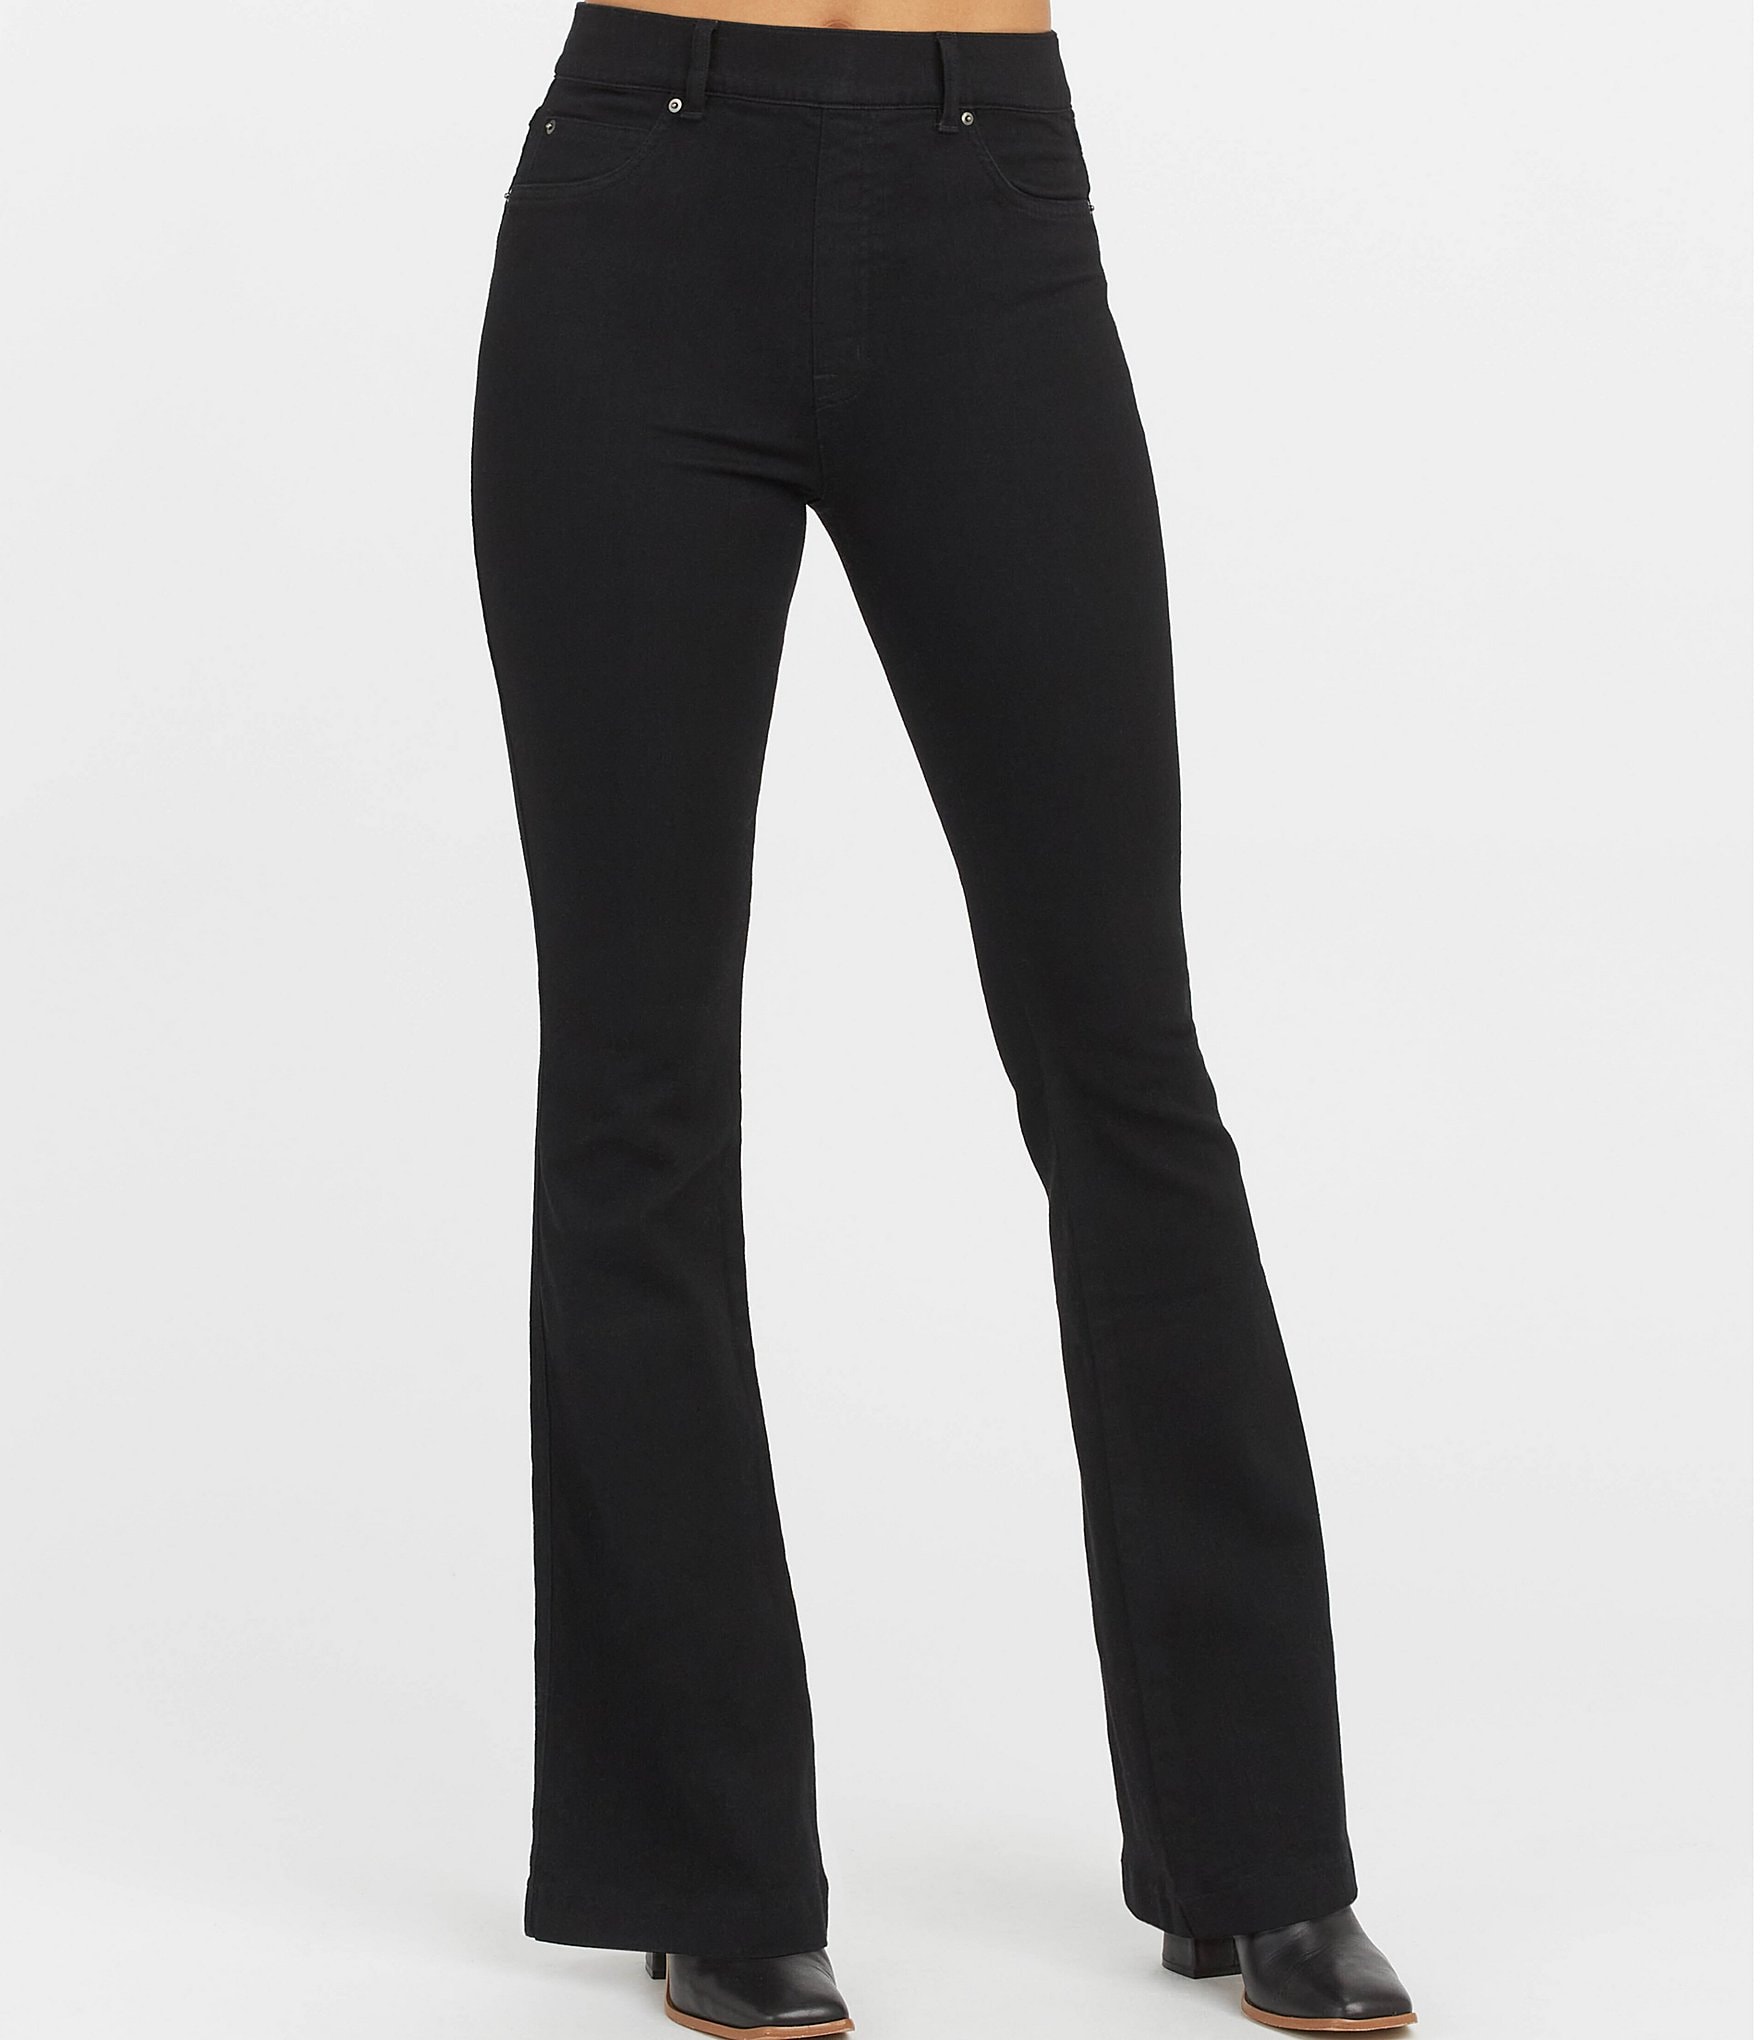 Spanx Flare Pull-On High Rise Stretch Jeans